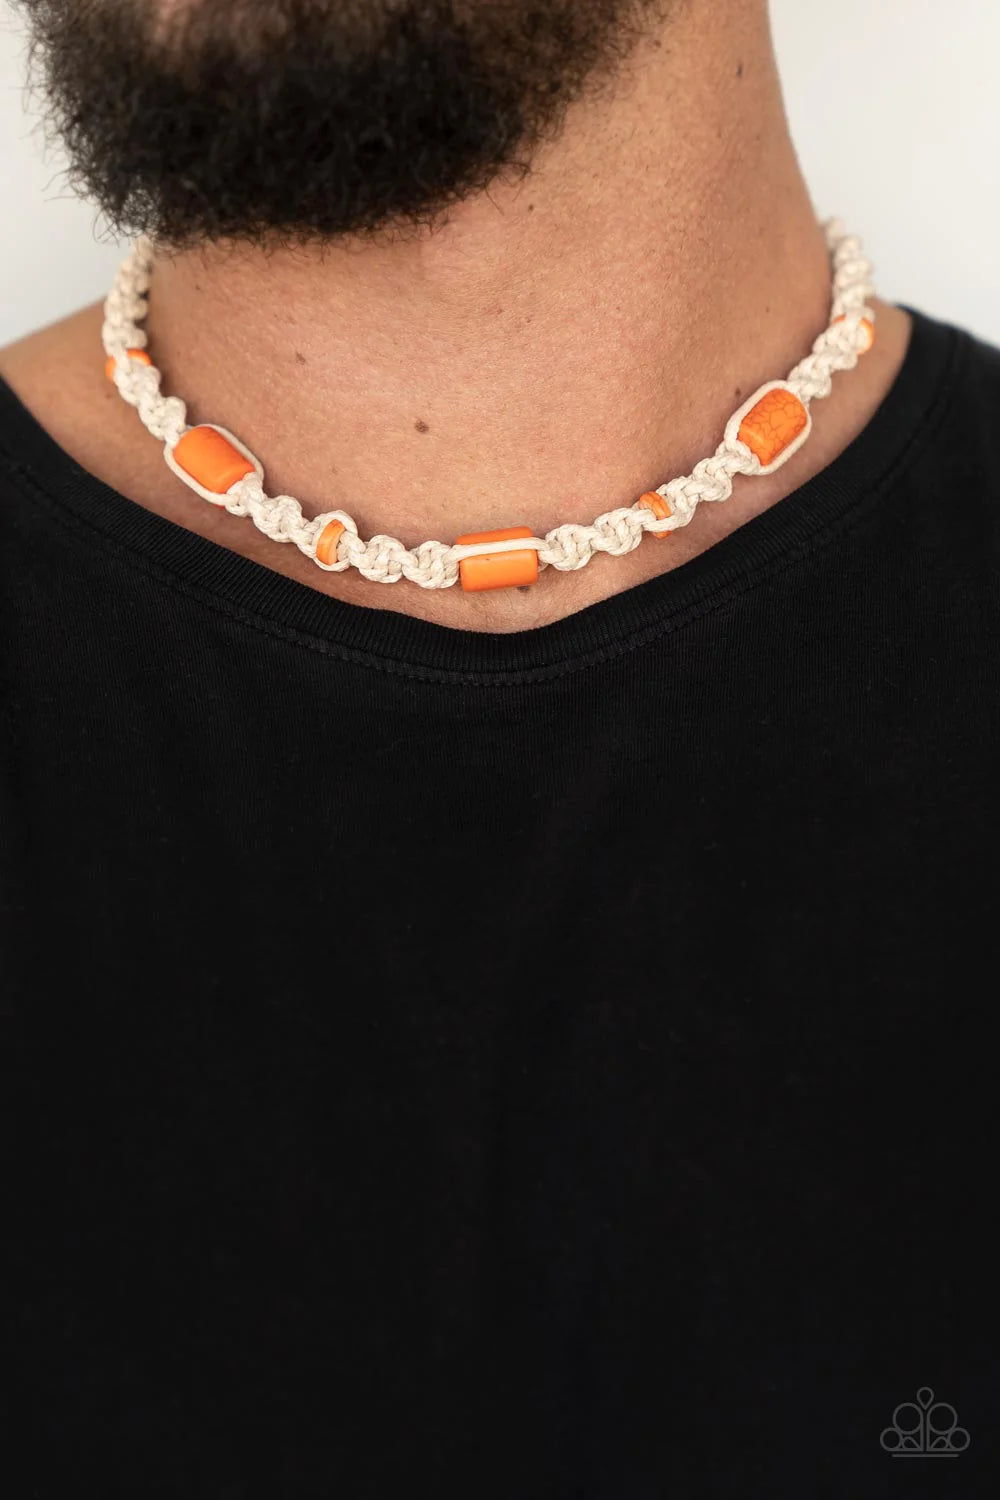 Paparazzi Accessories Explorer Exclusive - Orange Three cylindrical orange stones and small flat stone accents are thoughtfully woven into a macramé style necklace. The natural cord is knotted into a chunky spiral design creating a homespun sensation belo